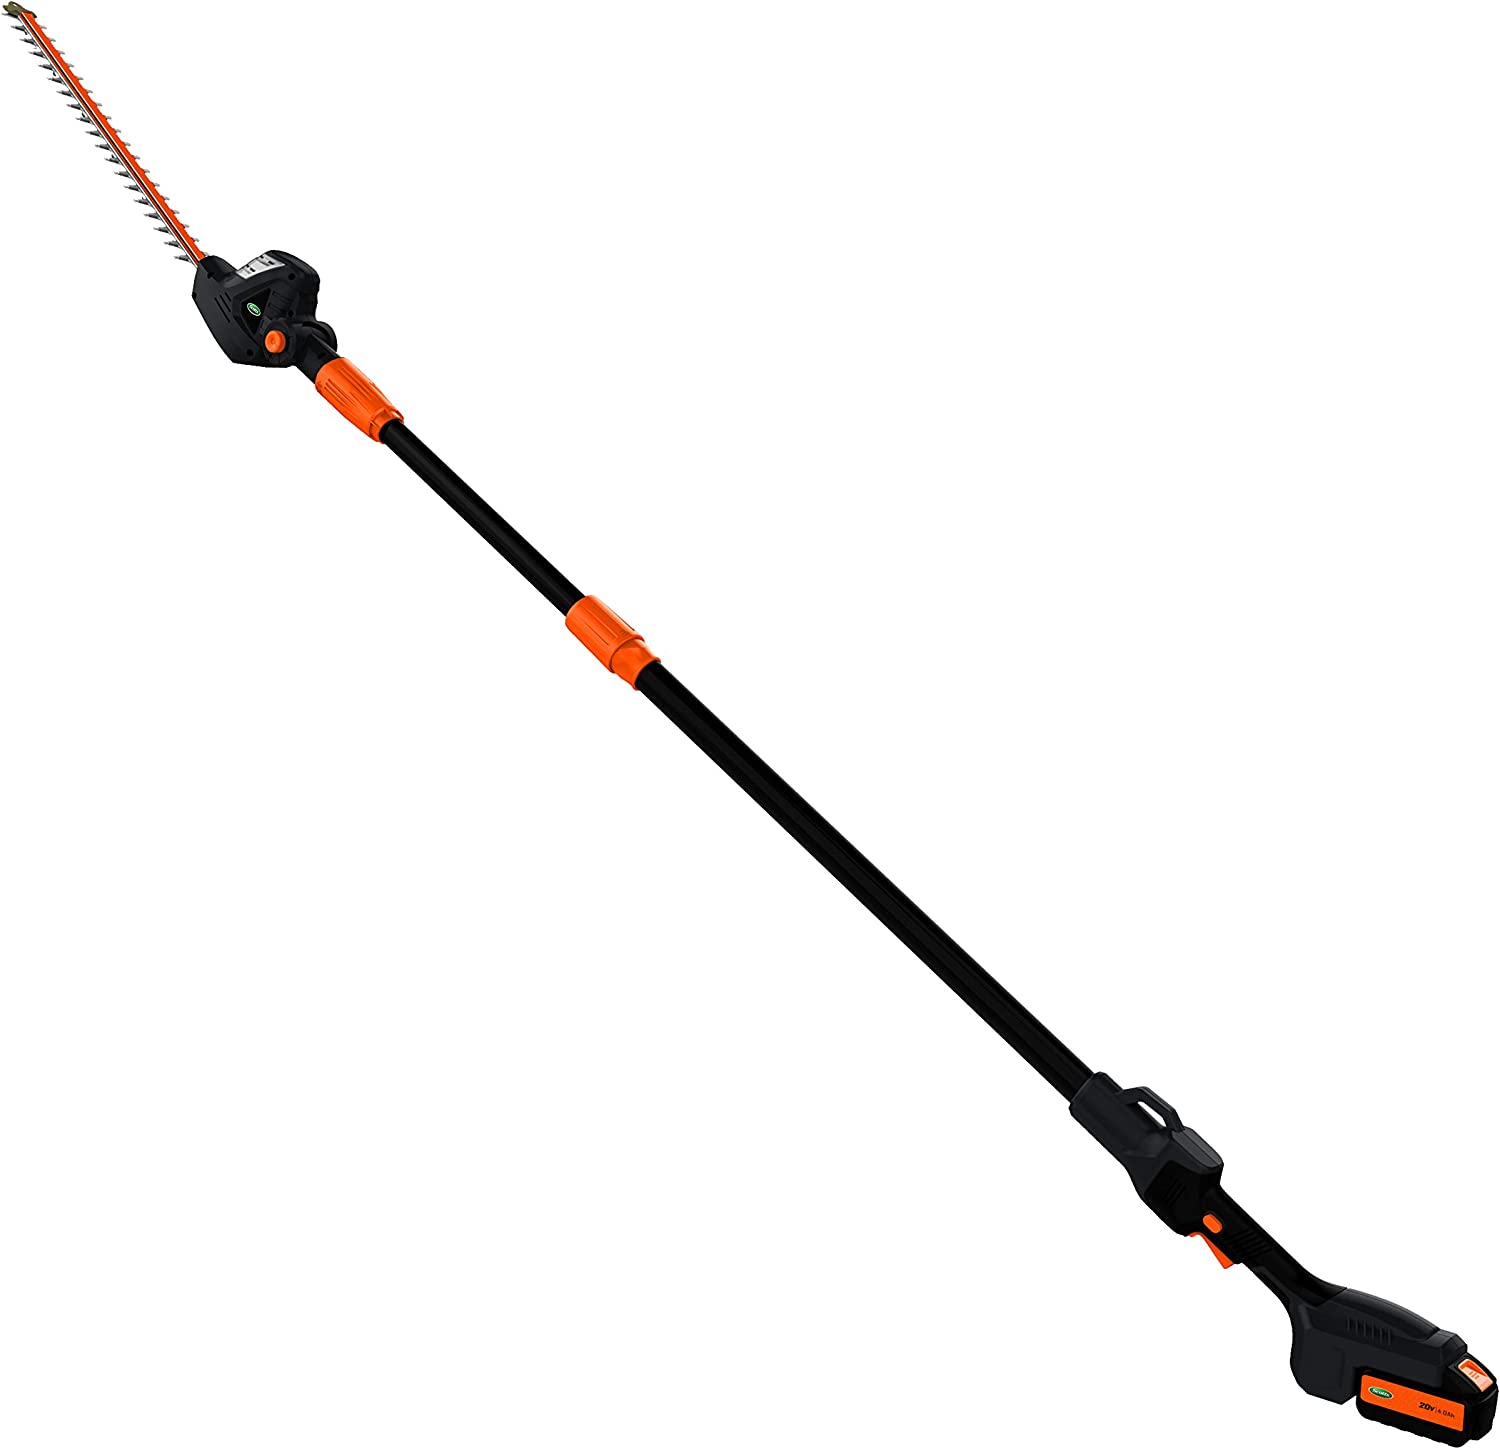 Scotts LPHT12122S 20-Volt 22-Inch Cordless Pole Hedge Trimmer, 2.0Ah Battery and Fast Charger Included